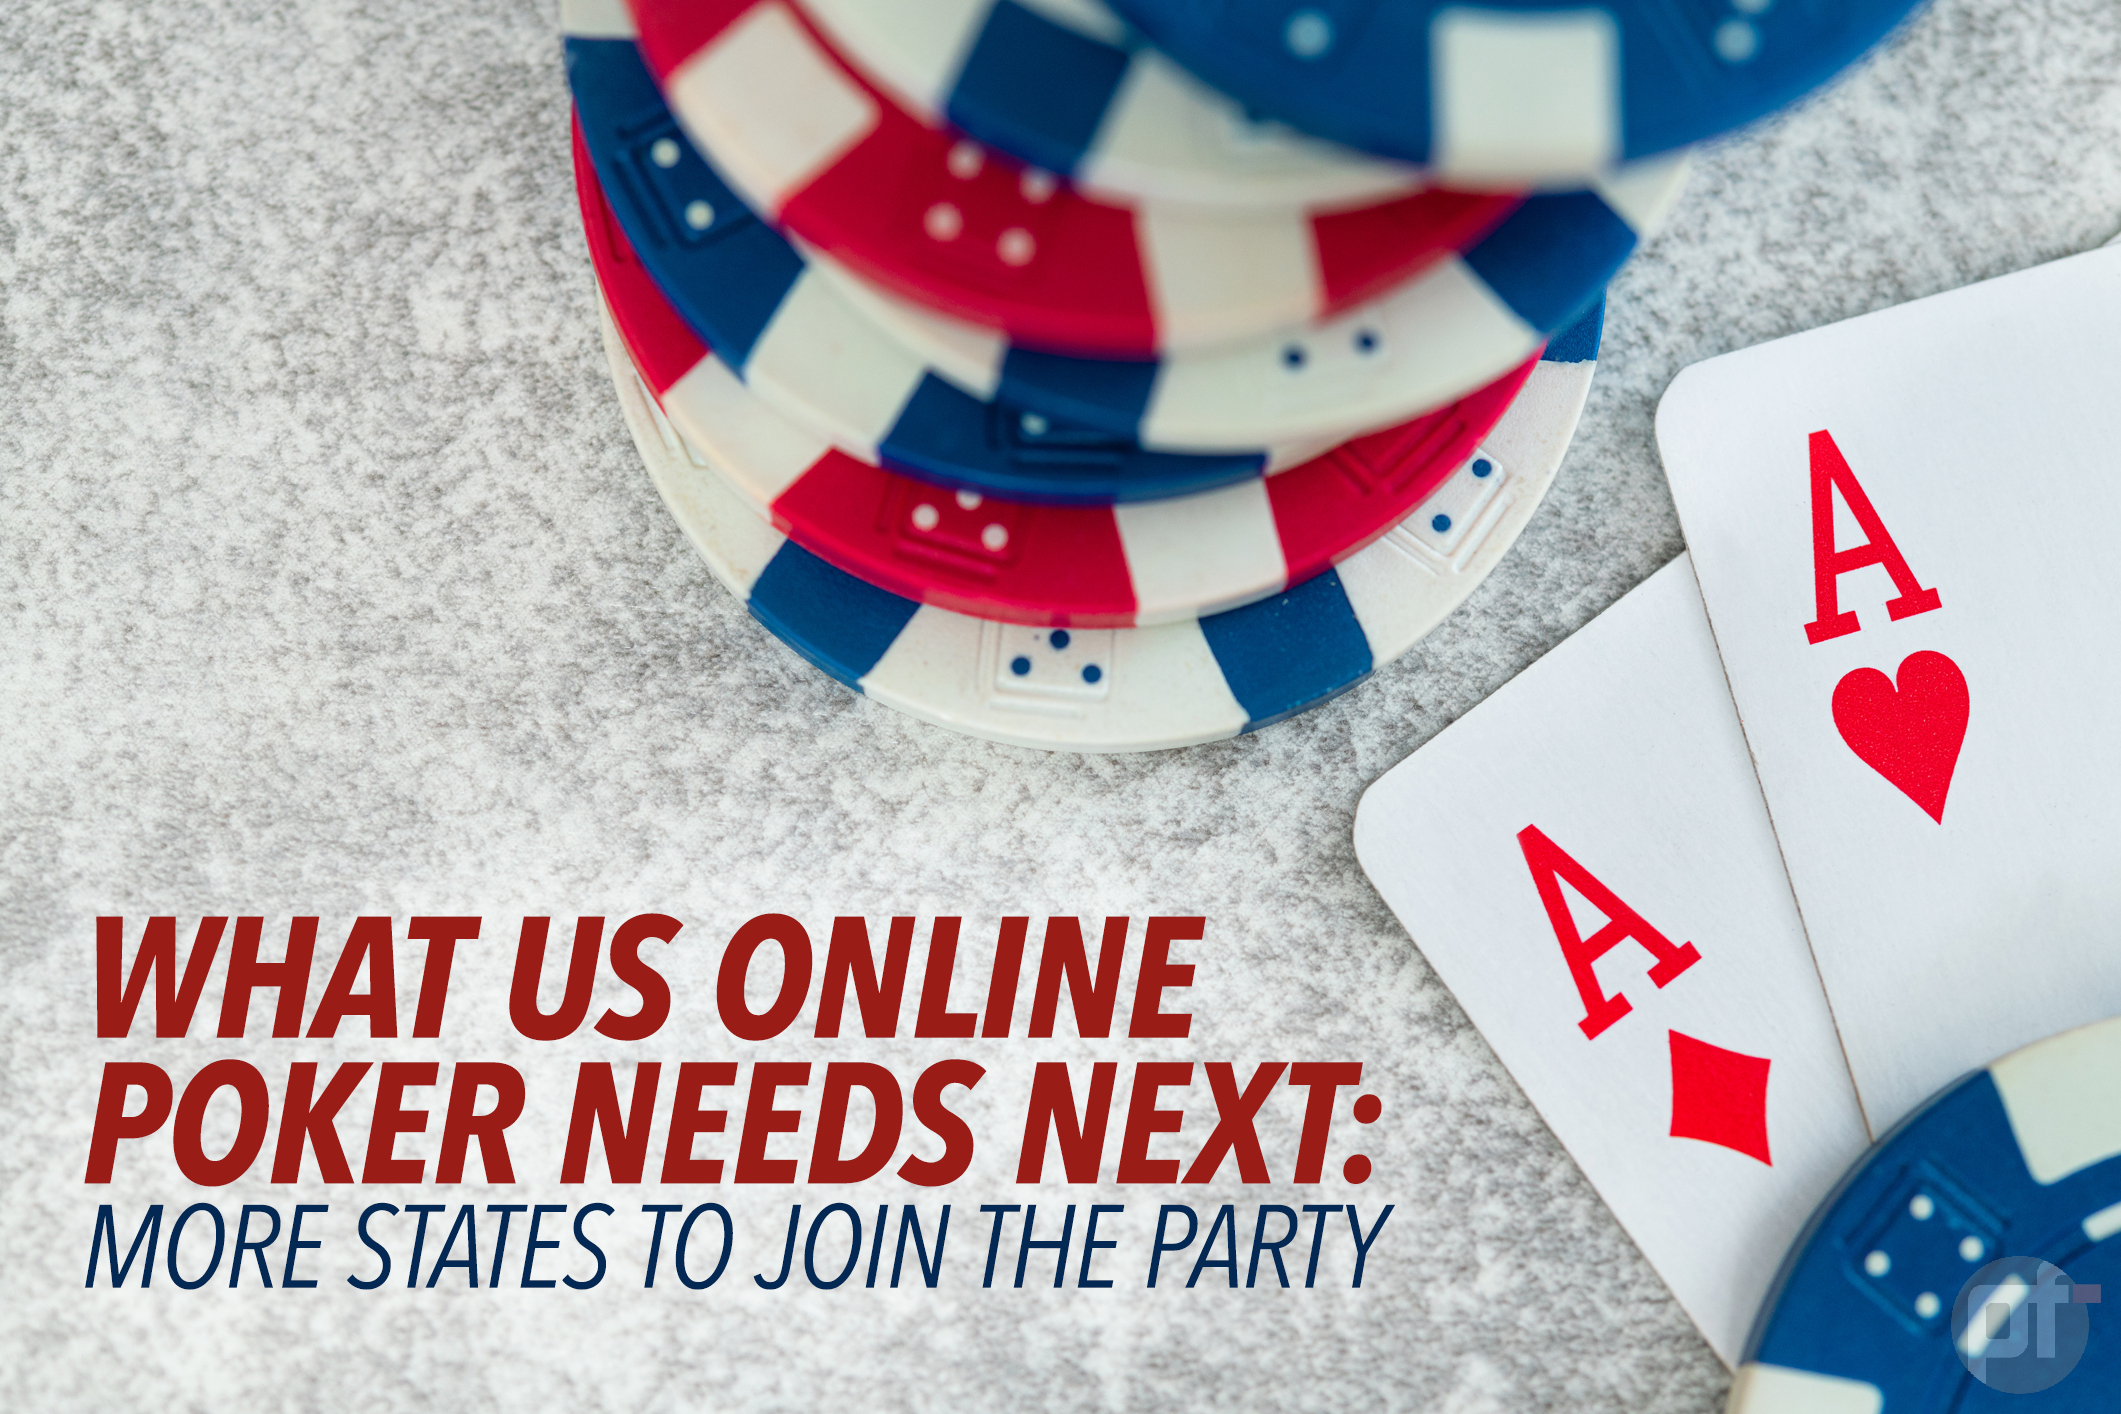 whats-next-us-online-poker-more-states-join-the-party-wm.png